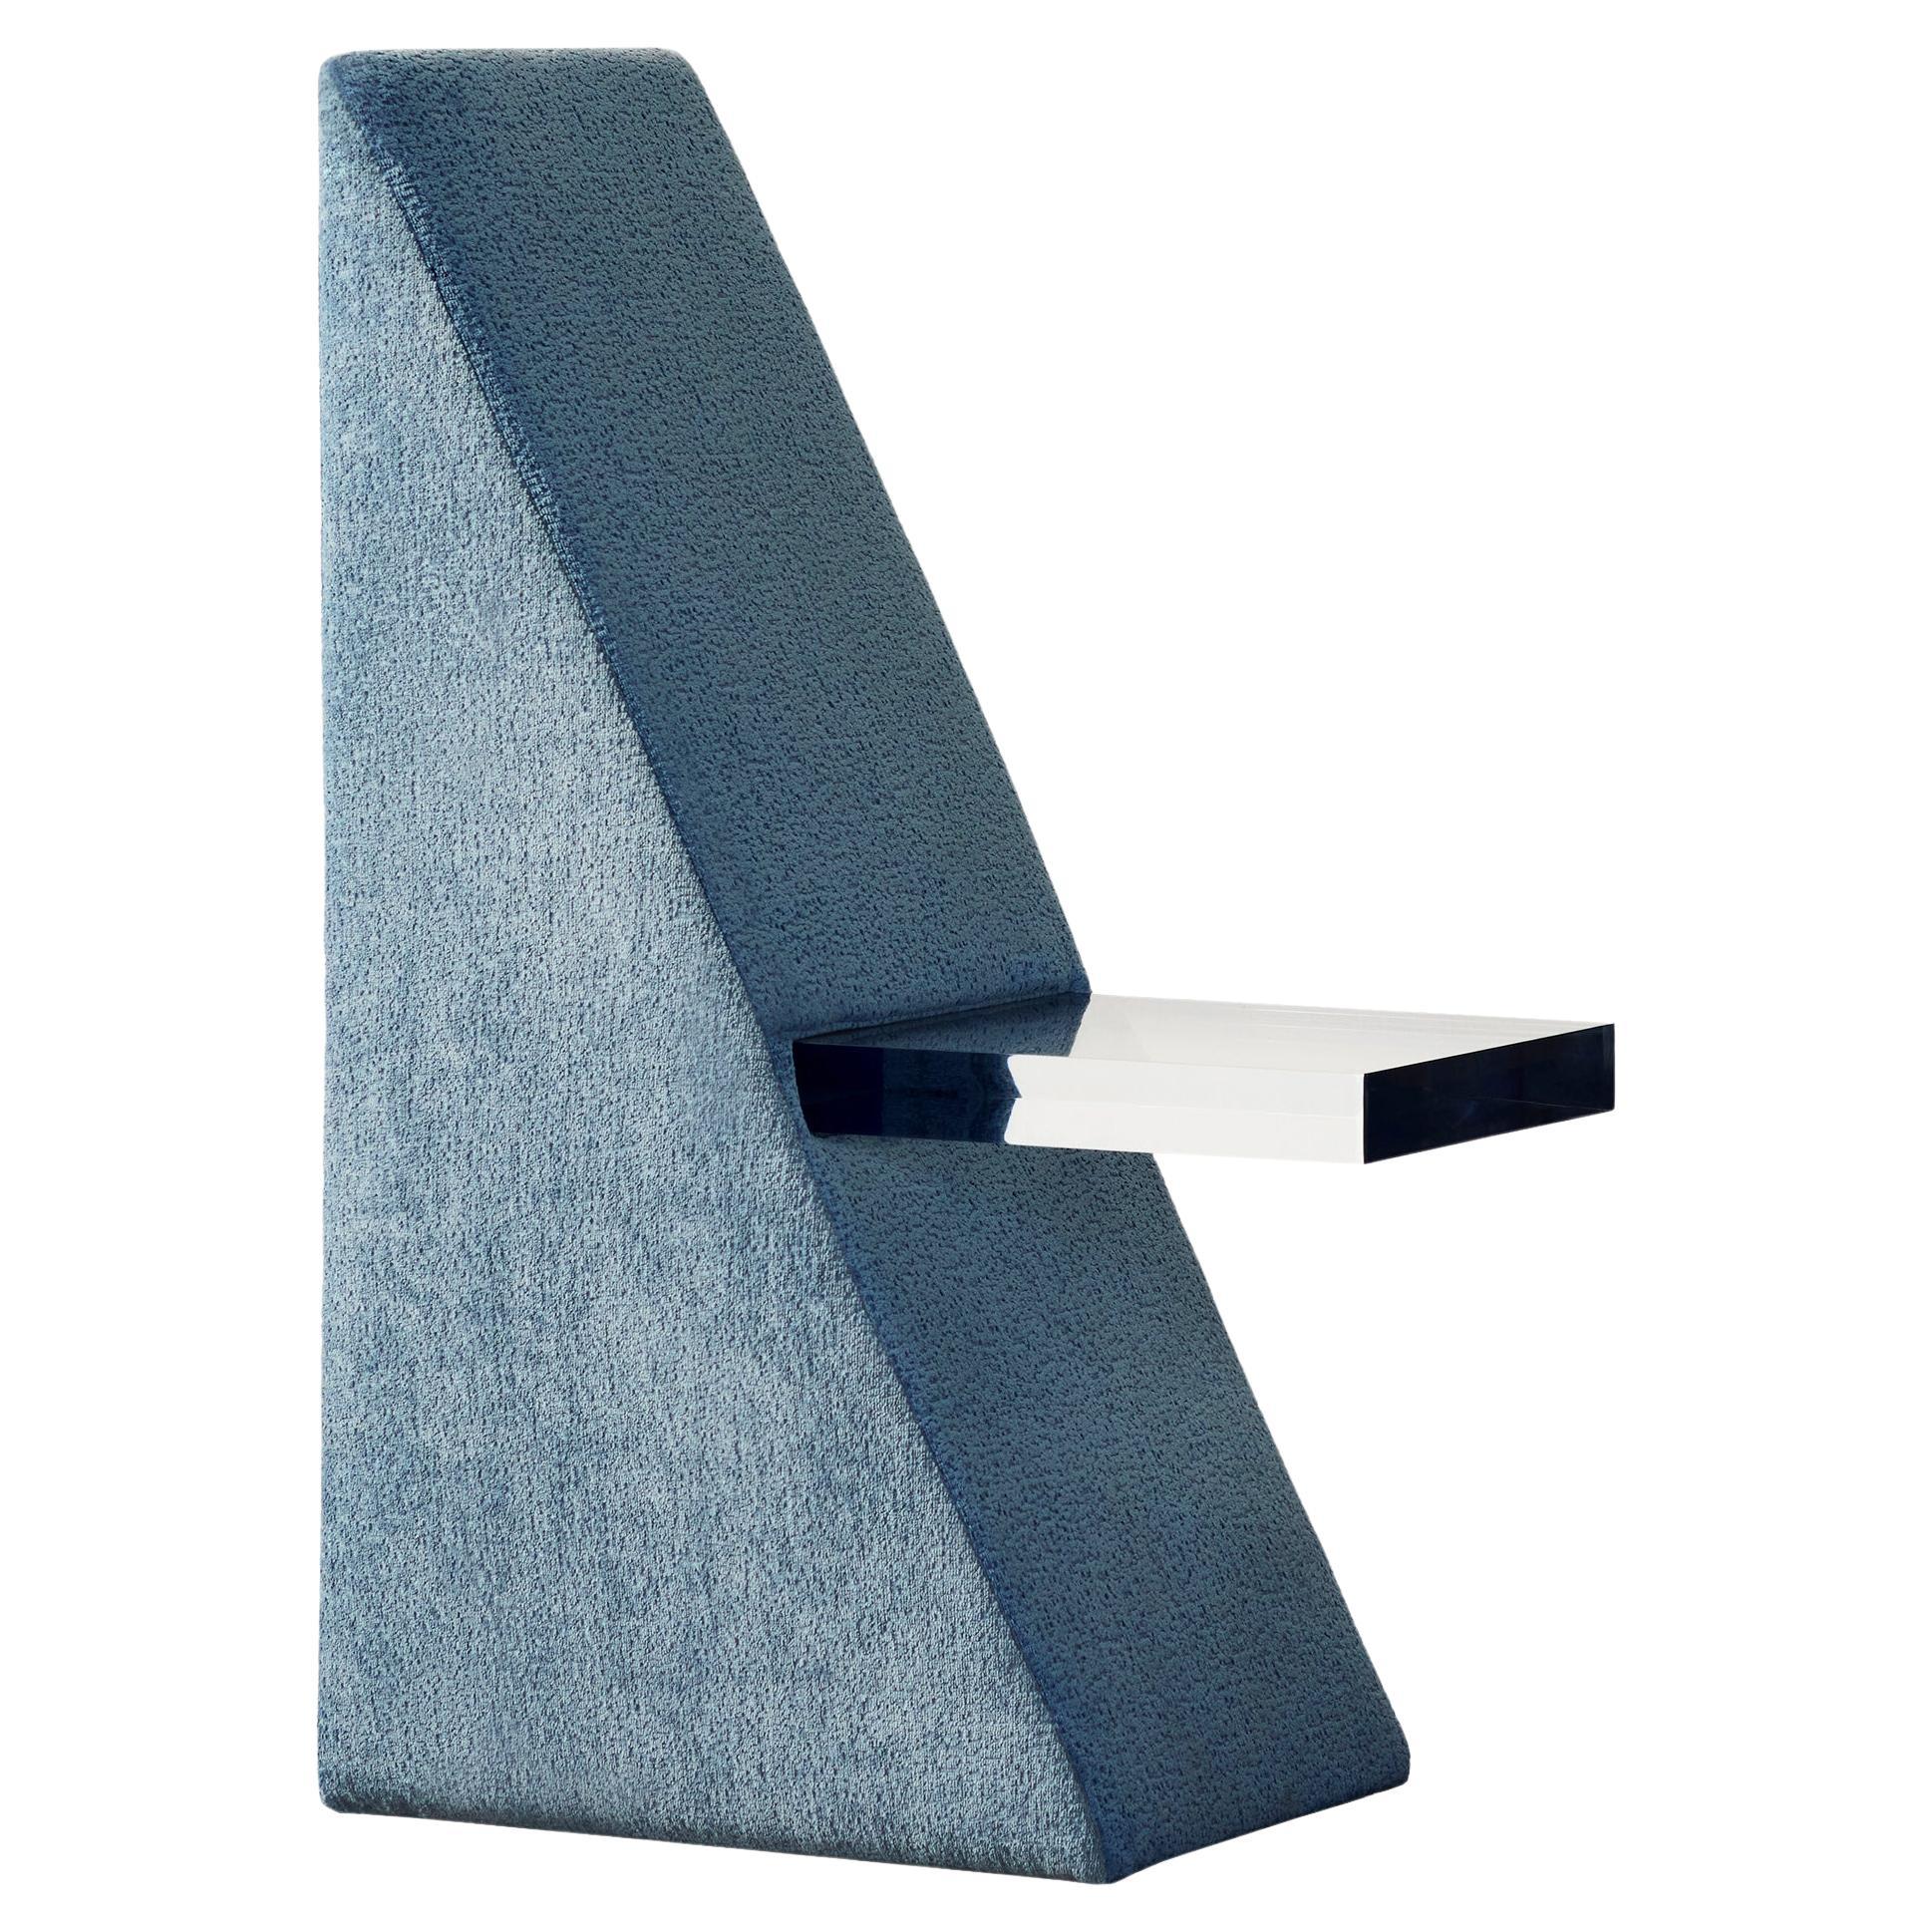 BLOC Wedge Upholstered Lucite Chair by Caroline Chao